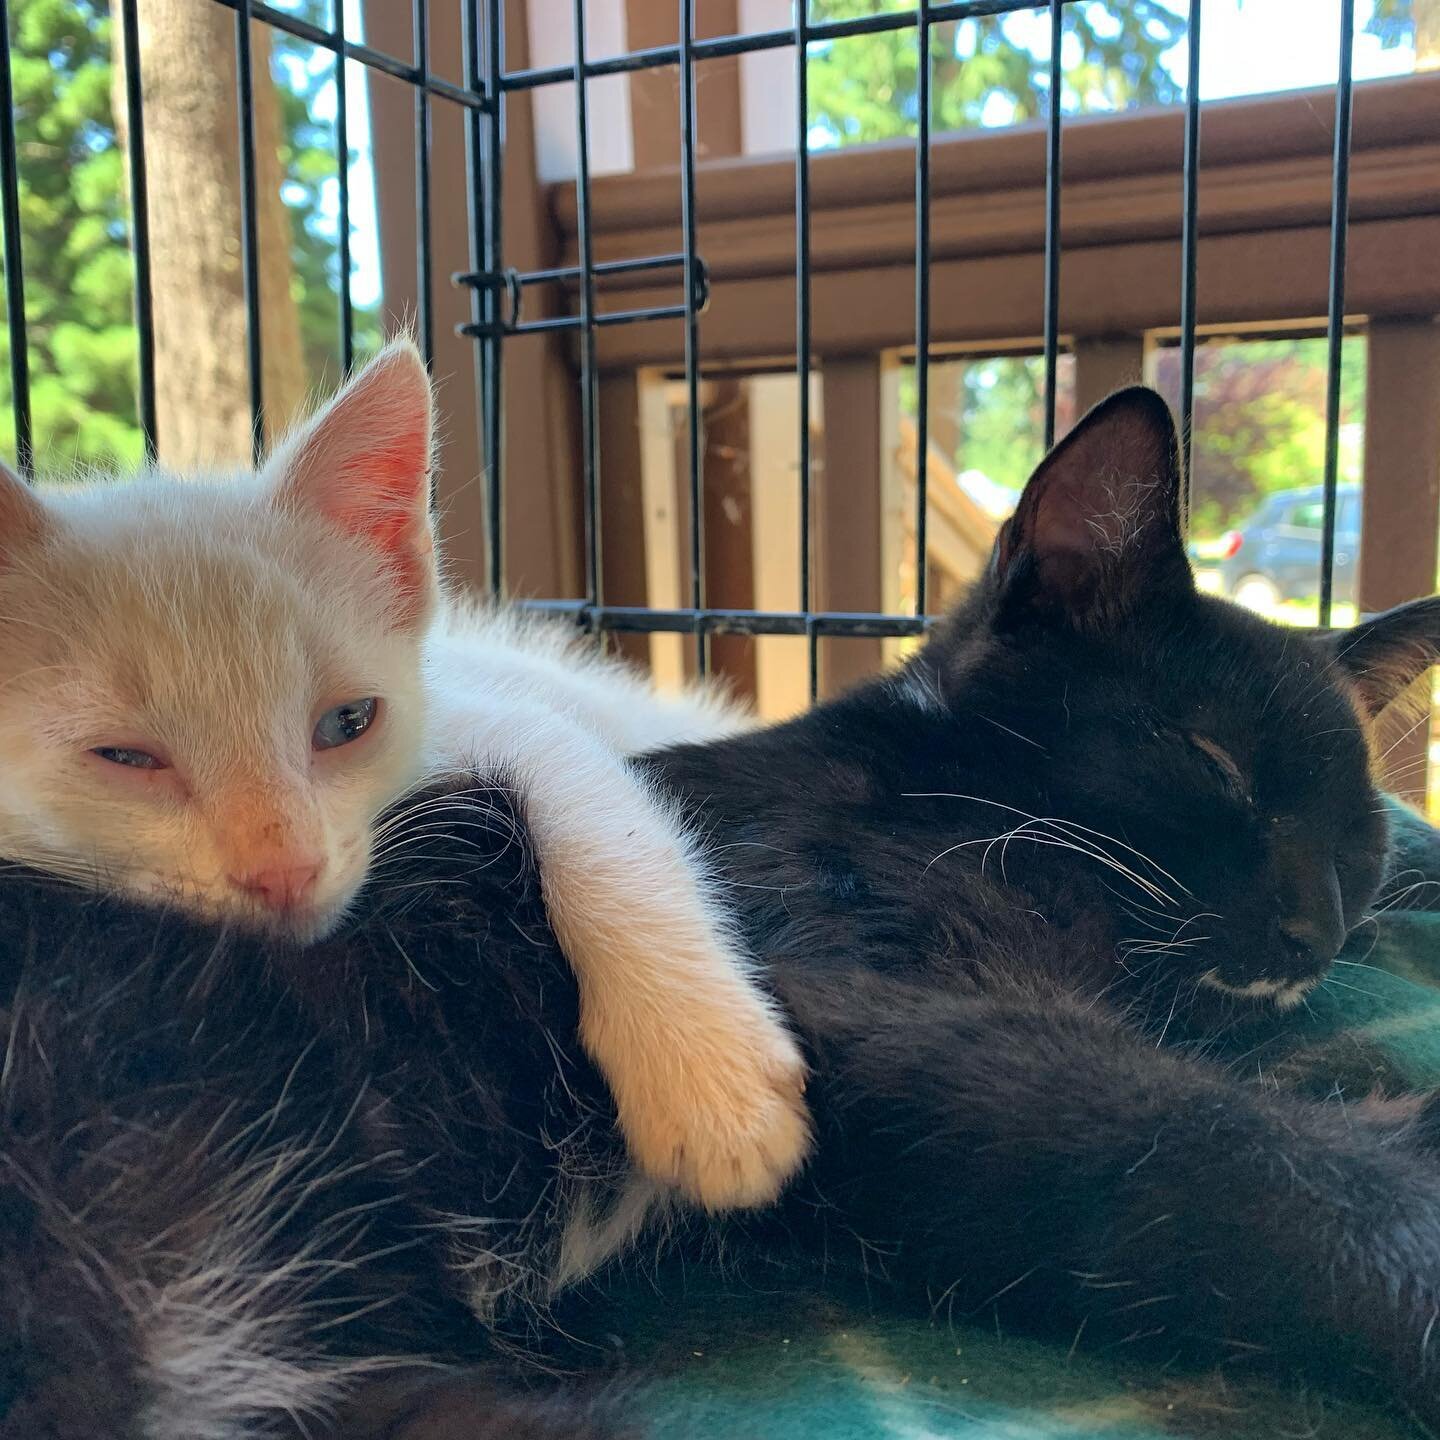 Good morning from Lenny and Squiggy(Squiggy is giving you the side eye 😒 in this pic)&hellip;
They were found abandoned in front of a house ( tenants were reportedly evicted and left a lot more on the property than kittens)in South Eugene on Monday.